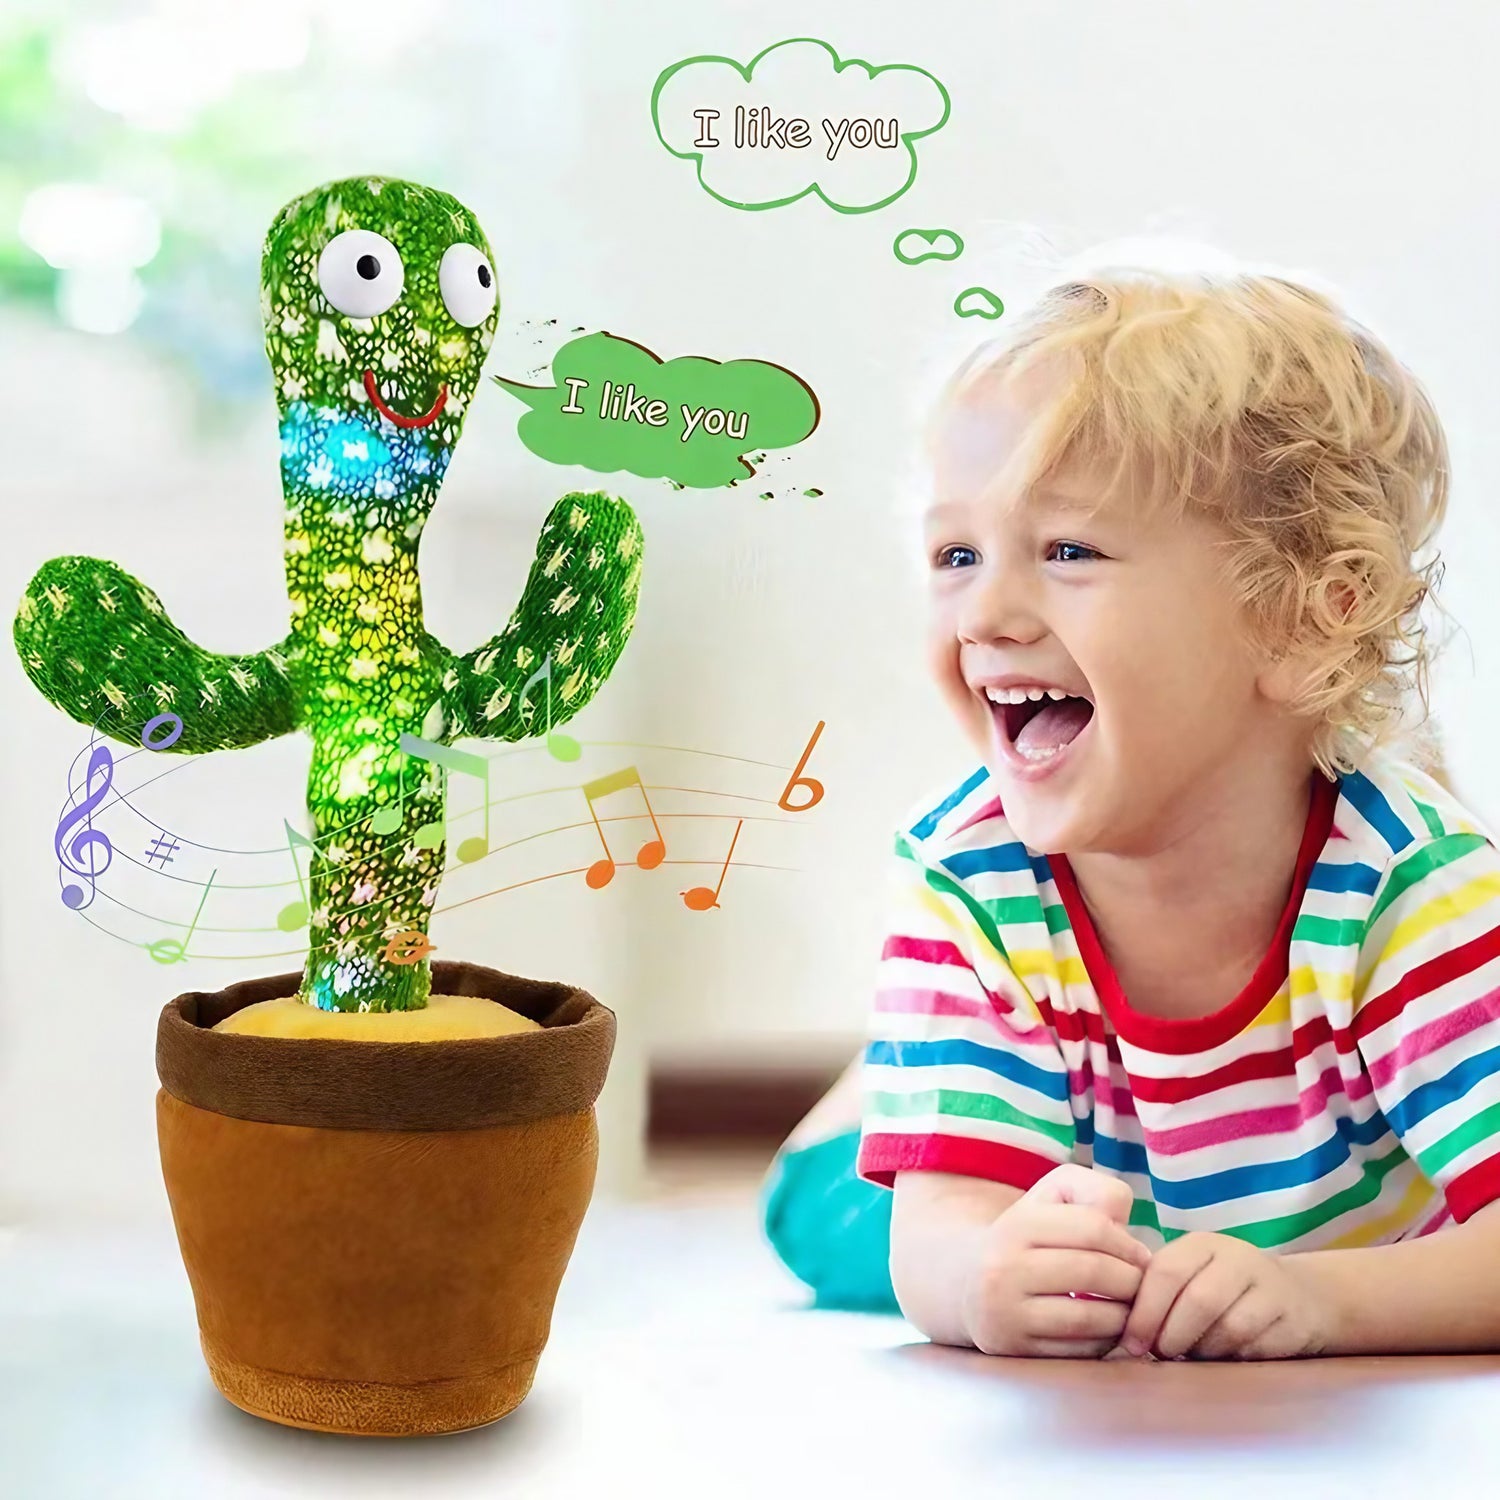 A young child engaged joyfully with a Soulful Trading Original Dancing Cactus Toy in a pot, which displays speech bubbles saying &quot;I like you&quot;.